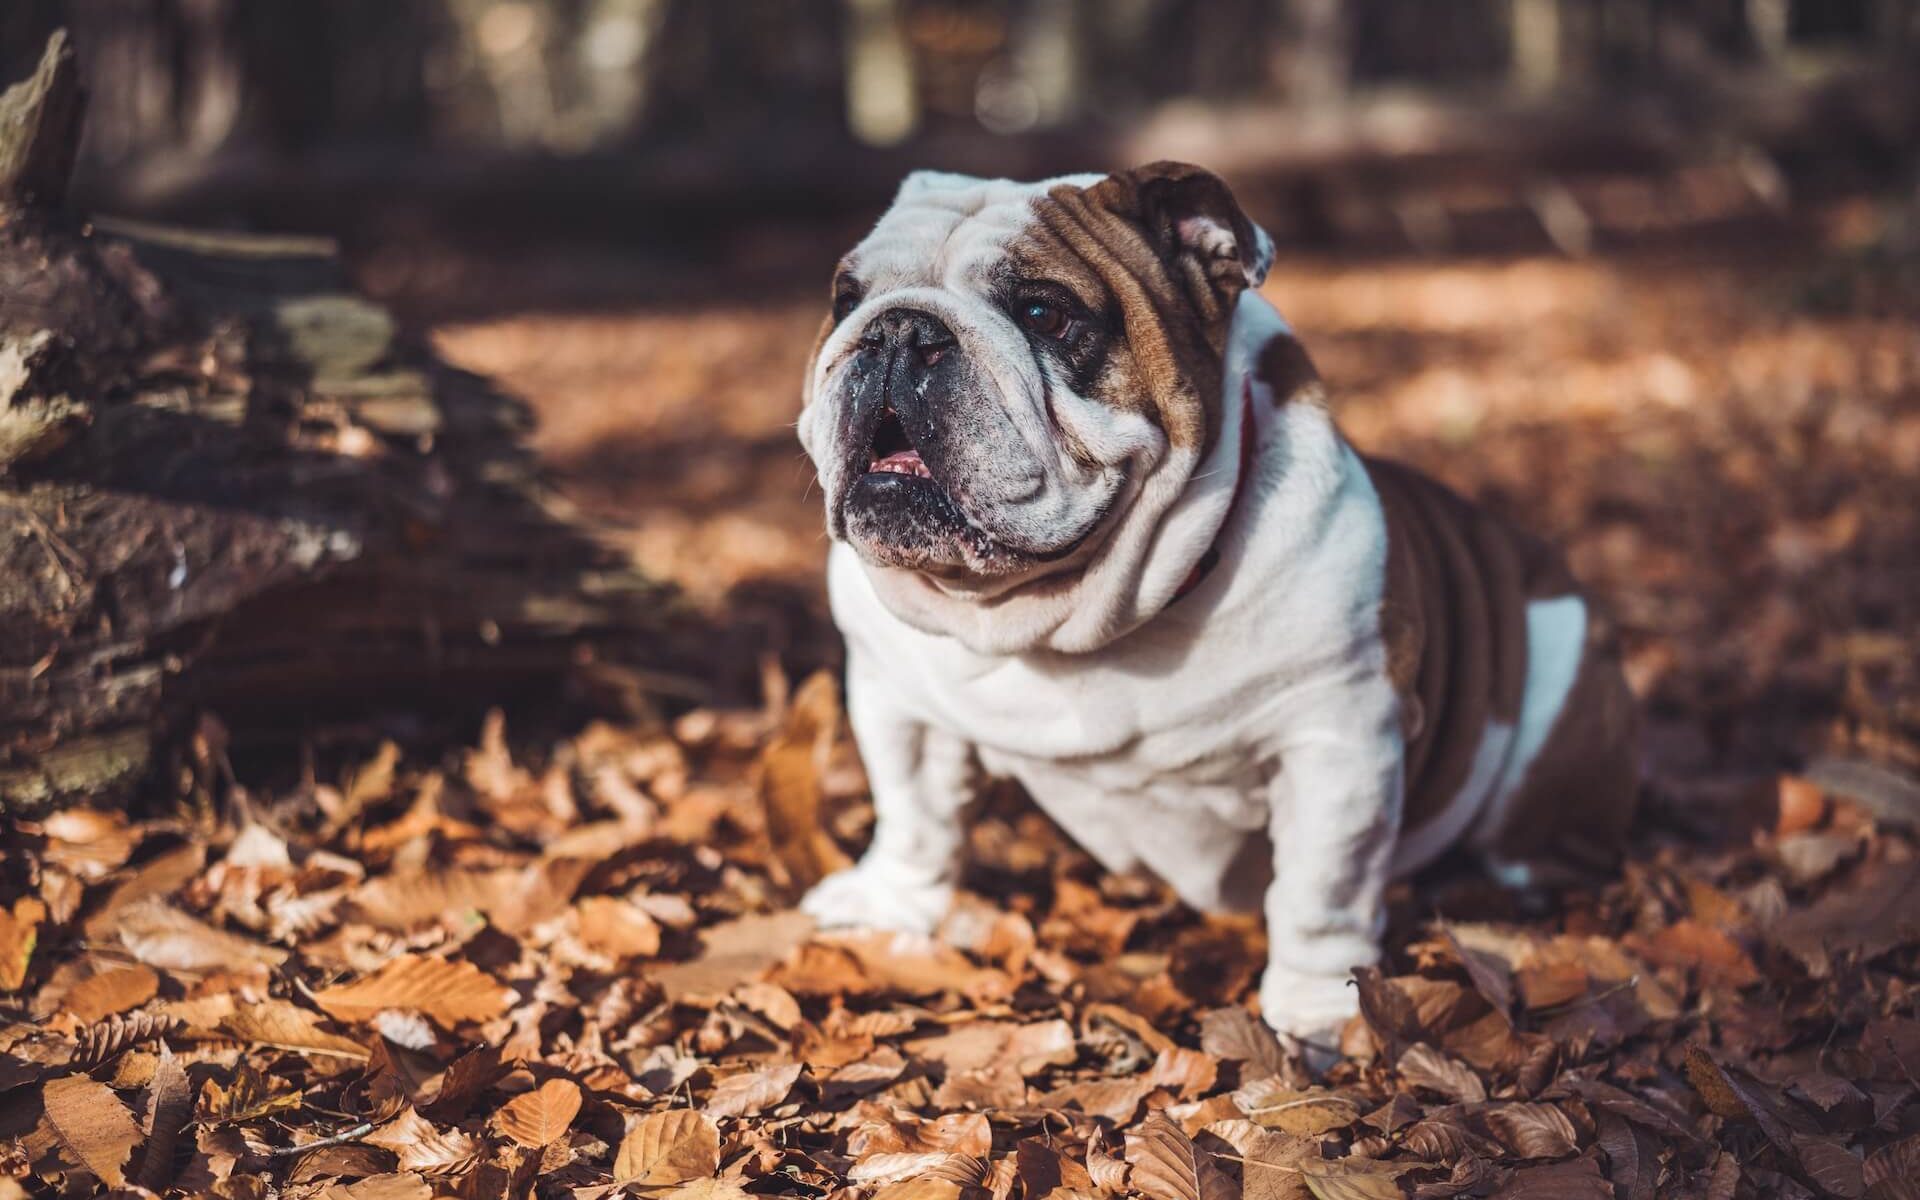 A strong and sturdy Bulldog with a determined look.